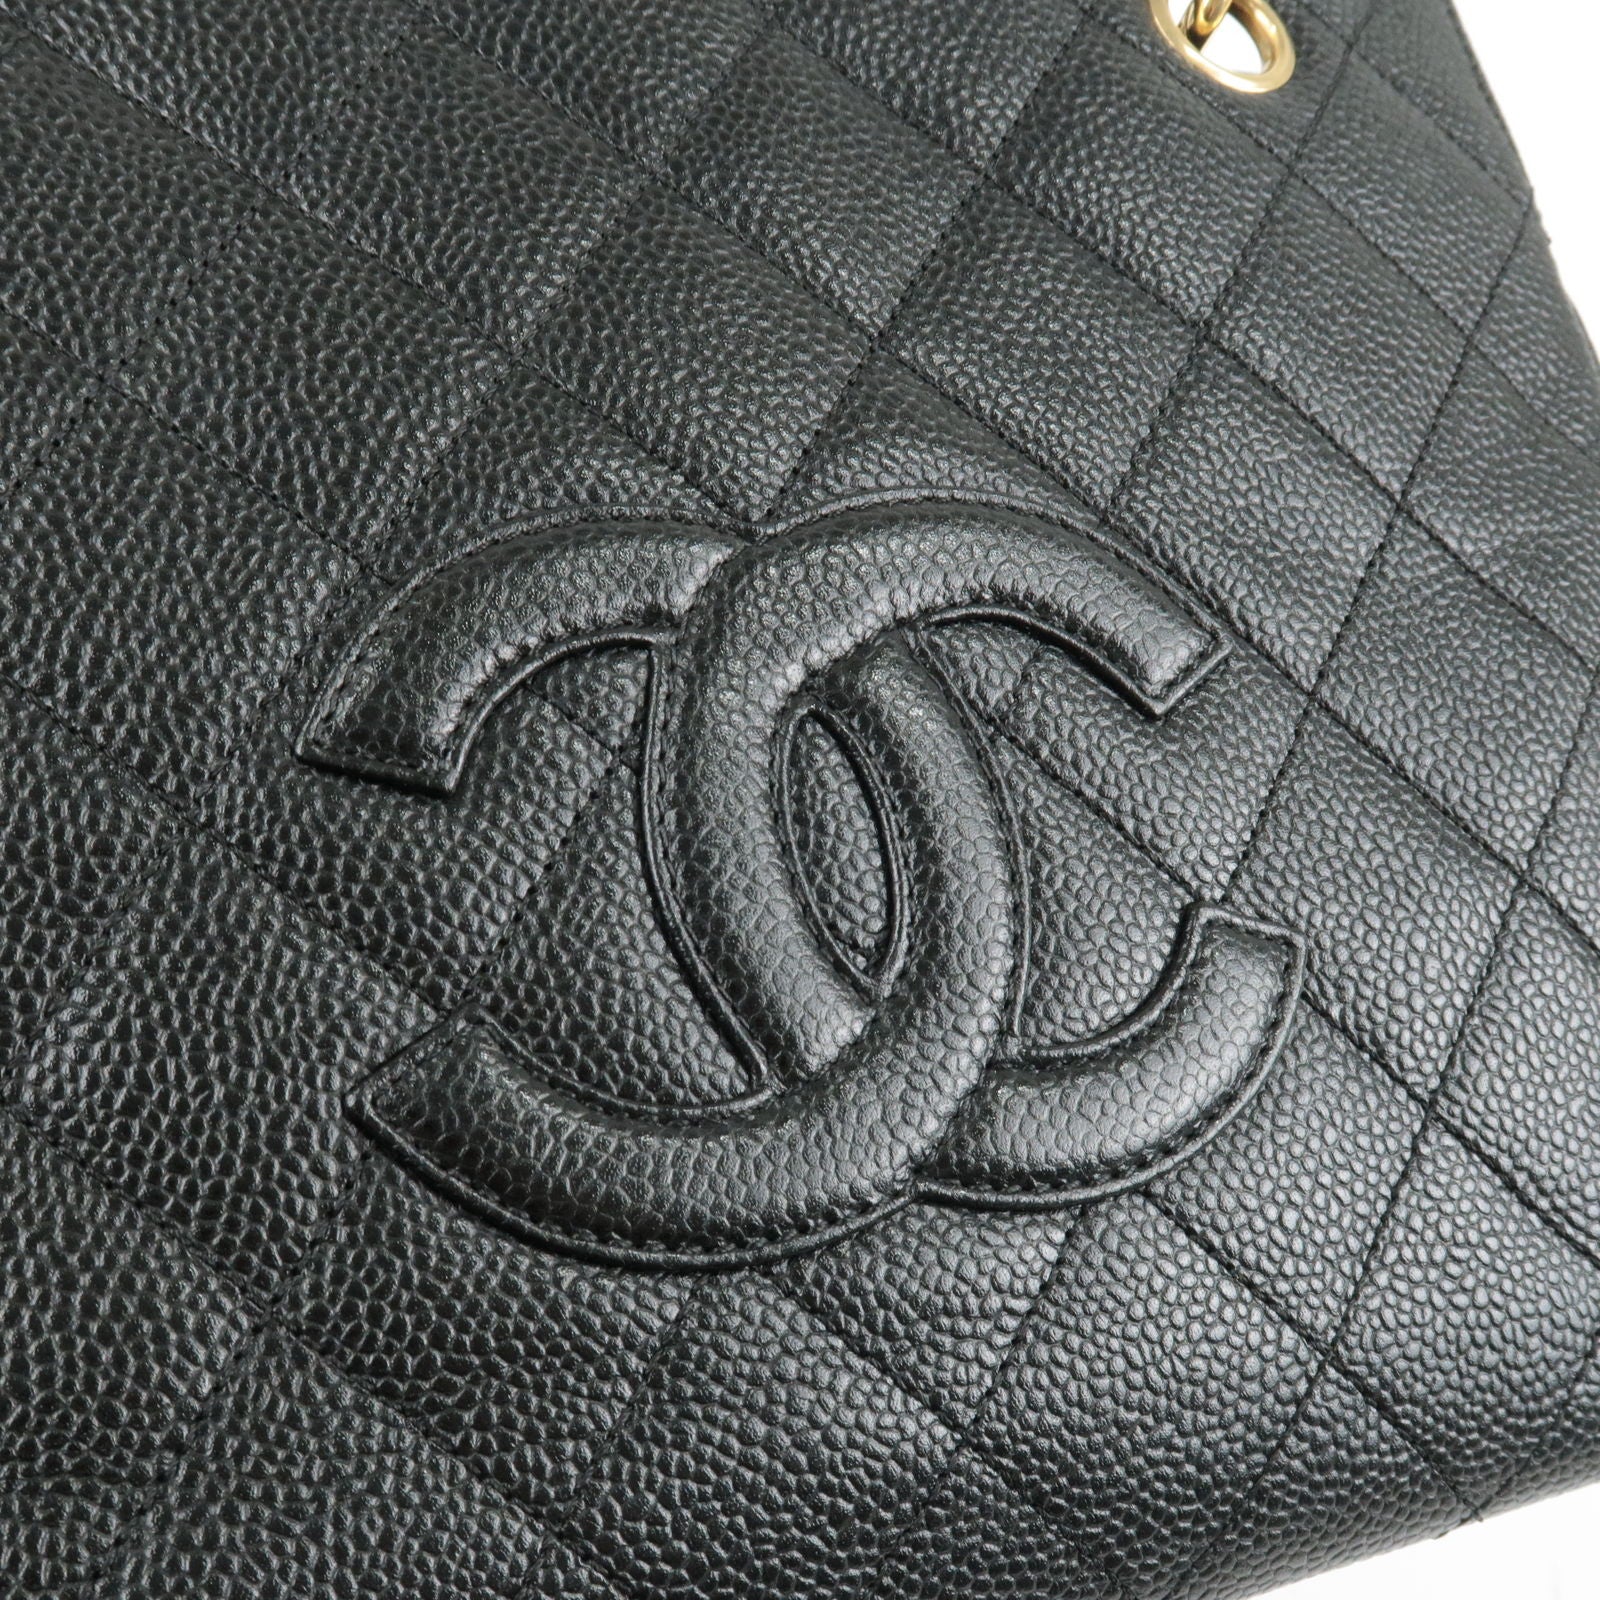 chanel quilted cosmetic bag